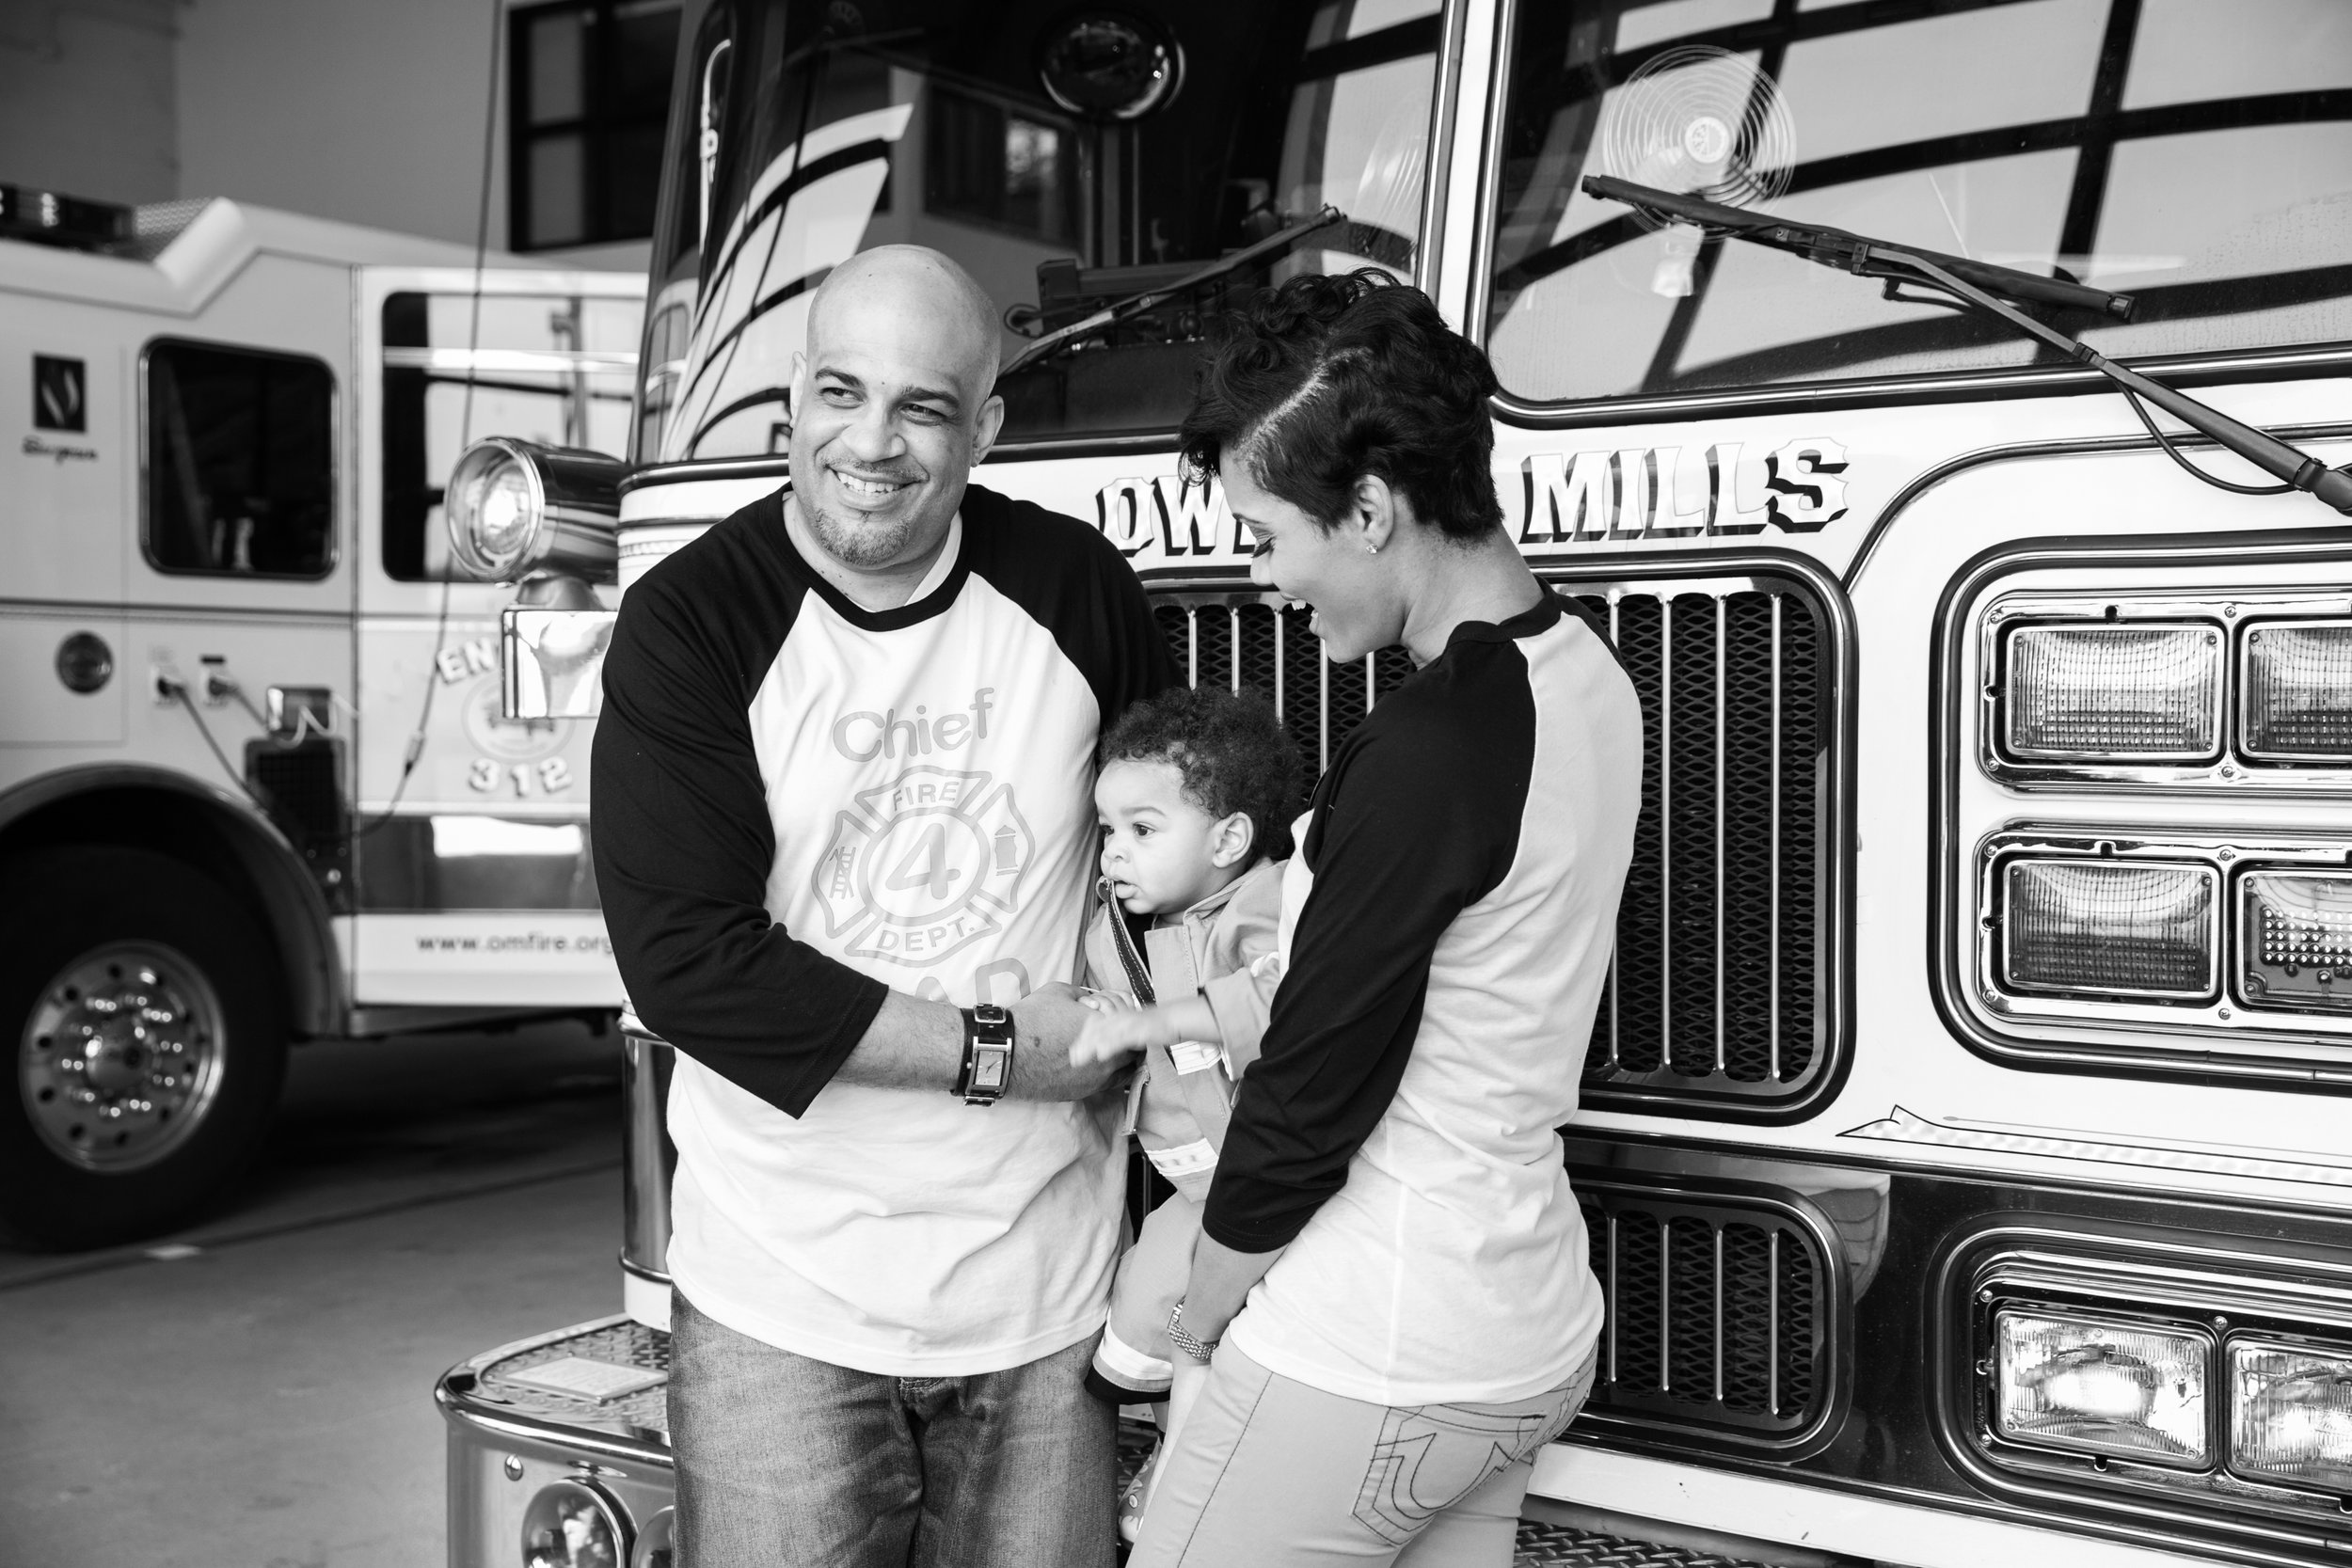 Fireman Birthday Party Ideas  Decorations Owings Mills Fire Department Maryland Family Photographers Megapixels Media Photography (16 of 55).jpg